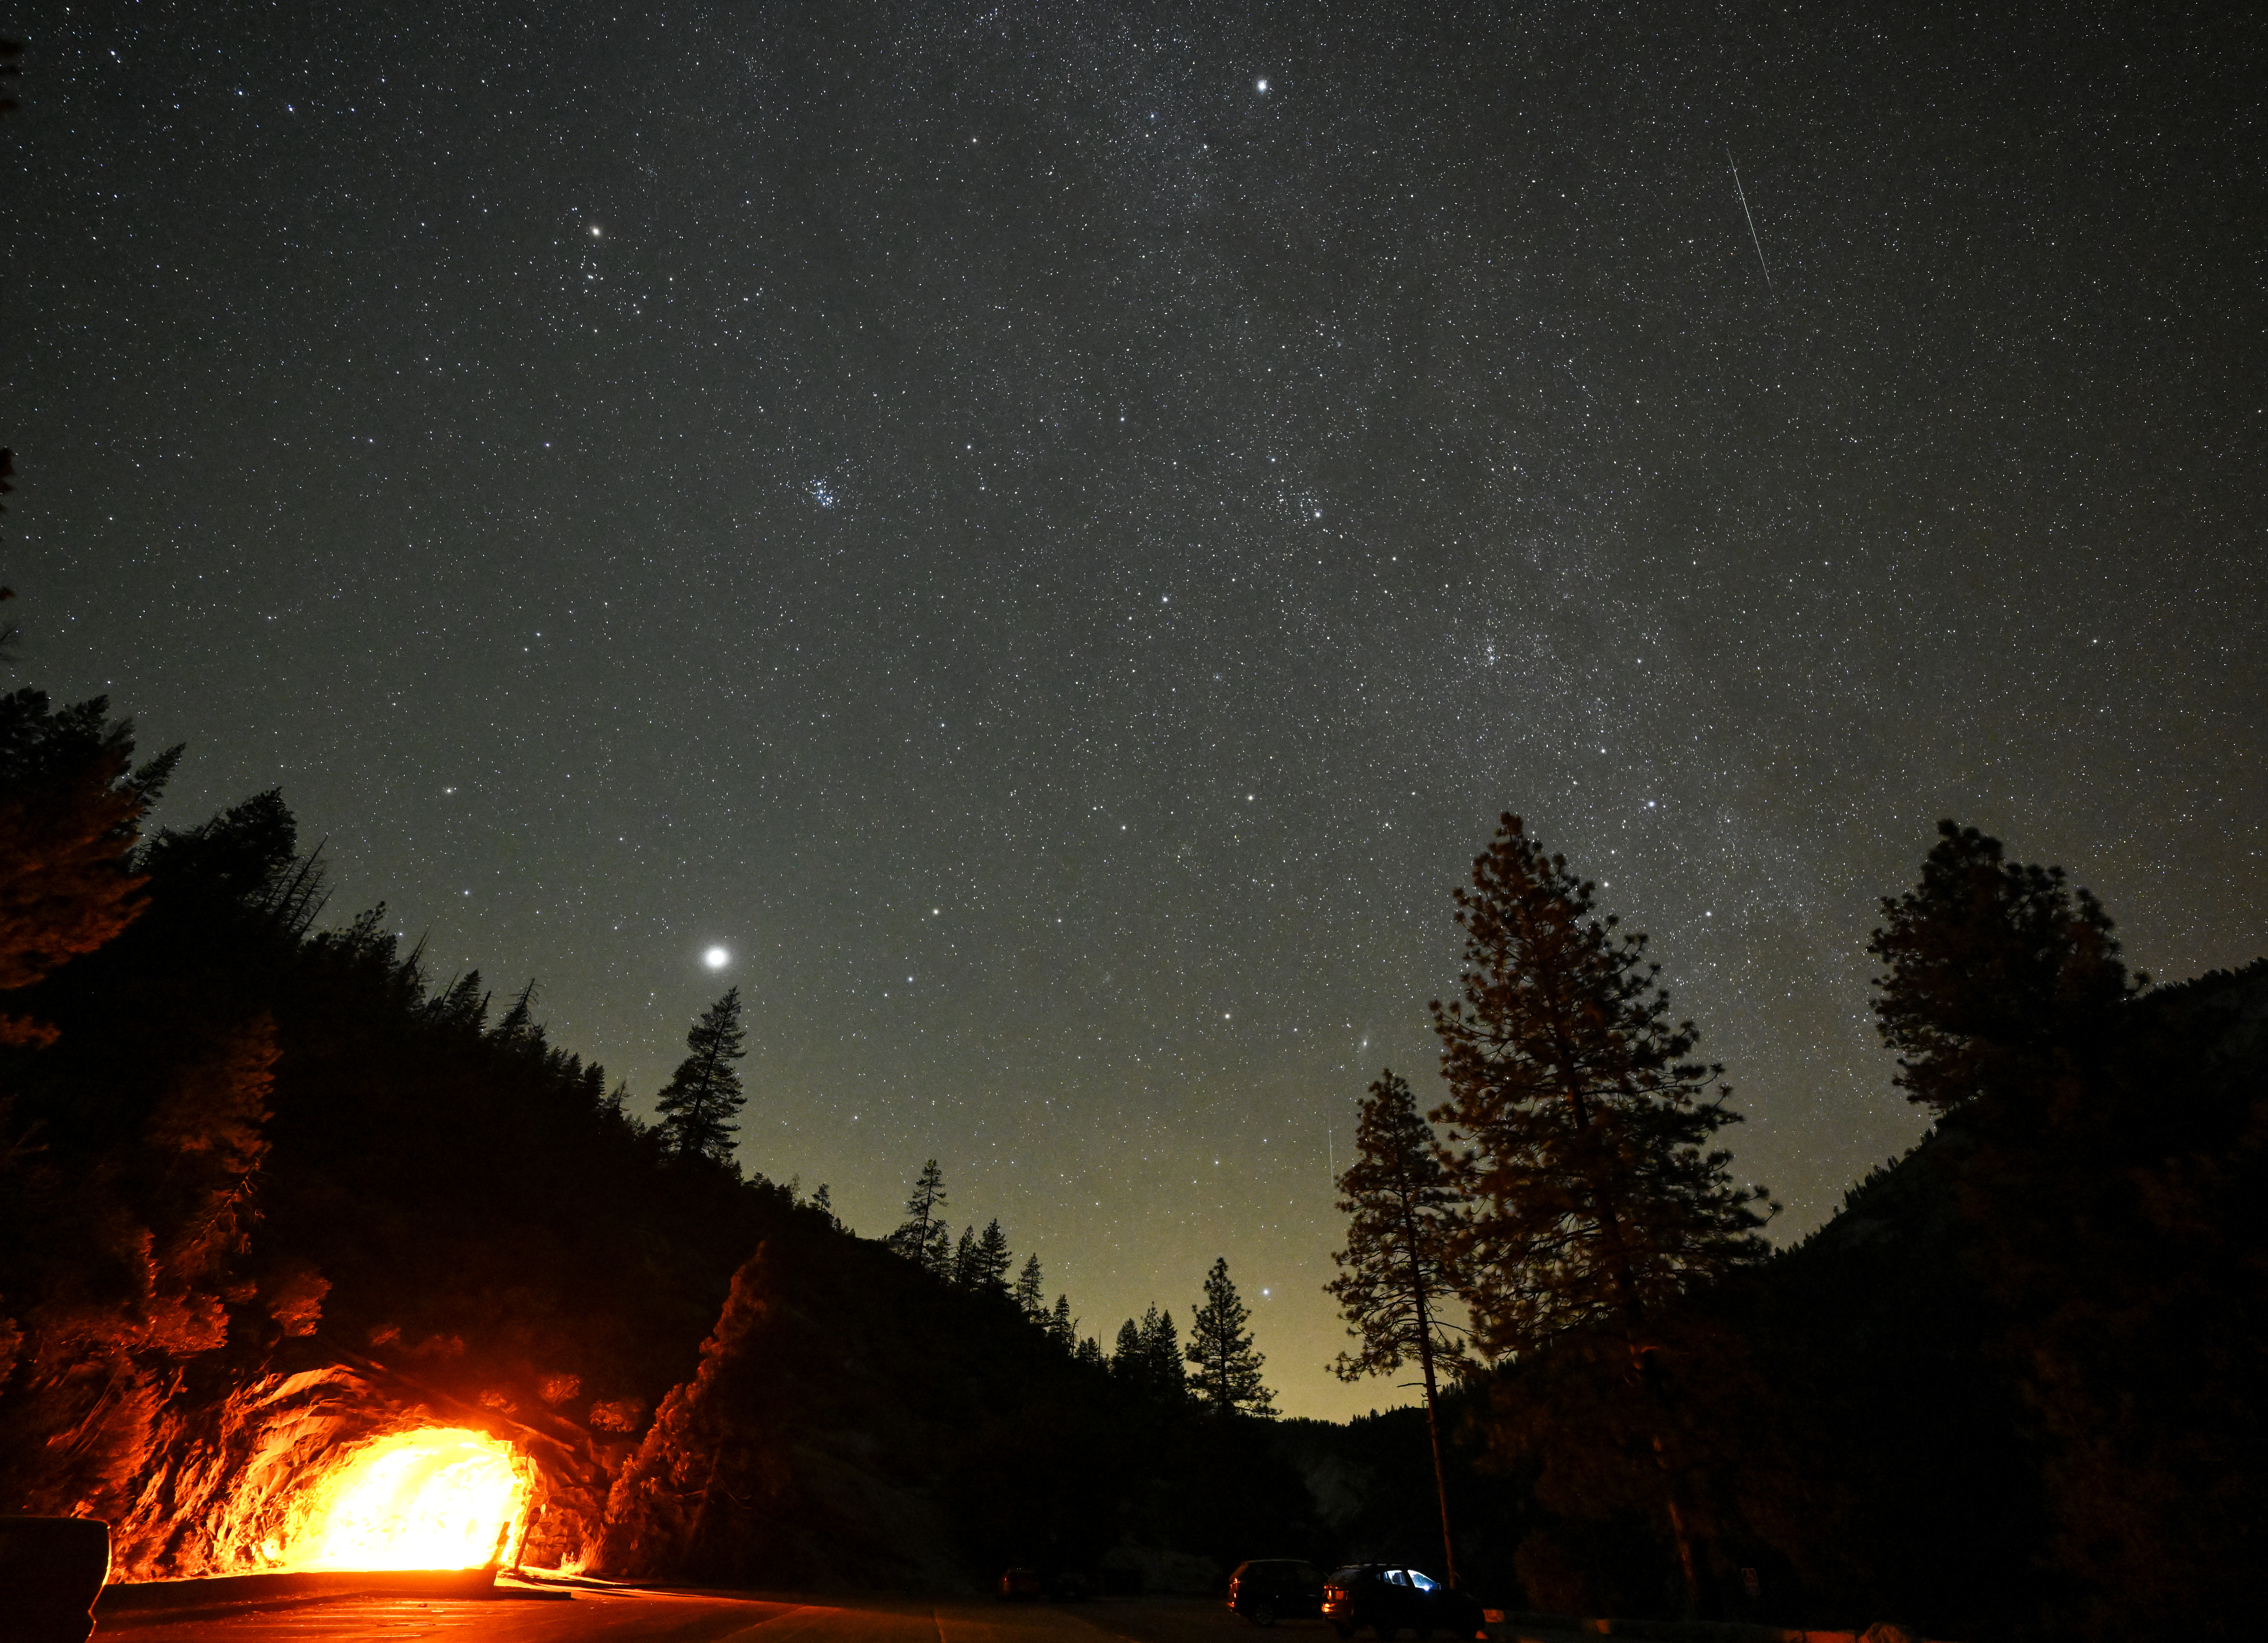 View of the starry night sky above trees showing the constellation